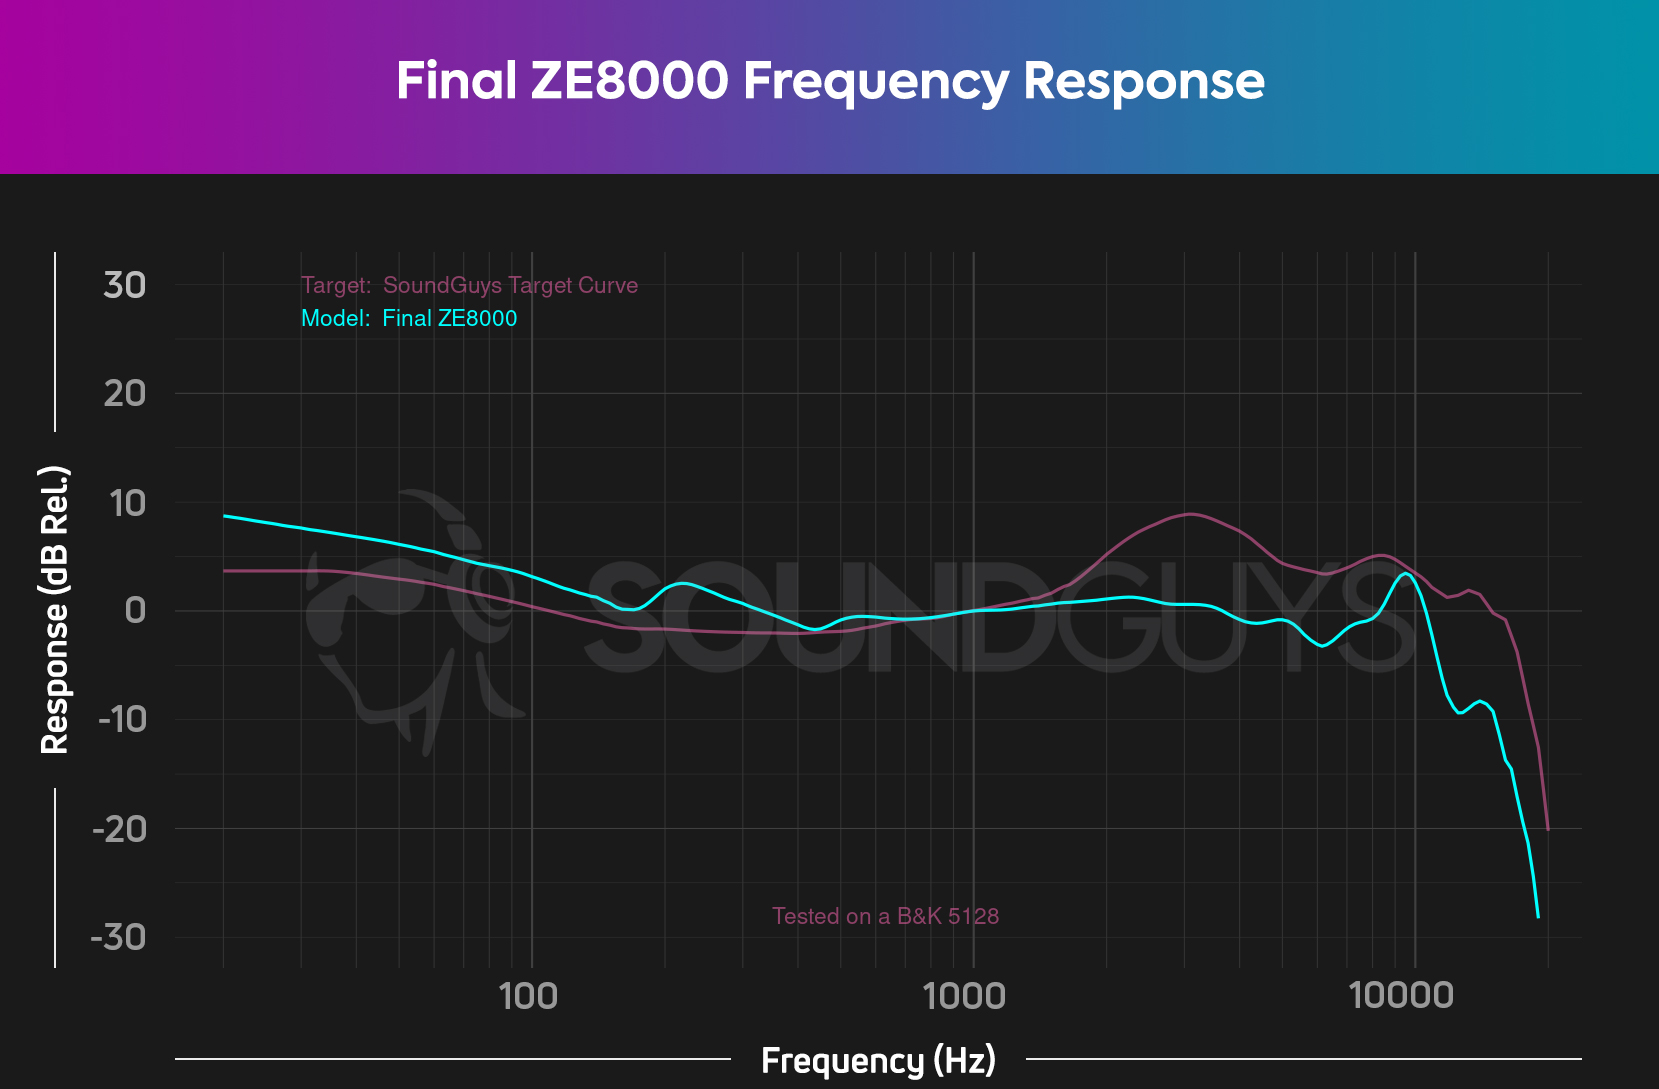 A frequency response chart compares the Final ZE8000 and the SoundGuys preferred curve.